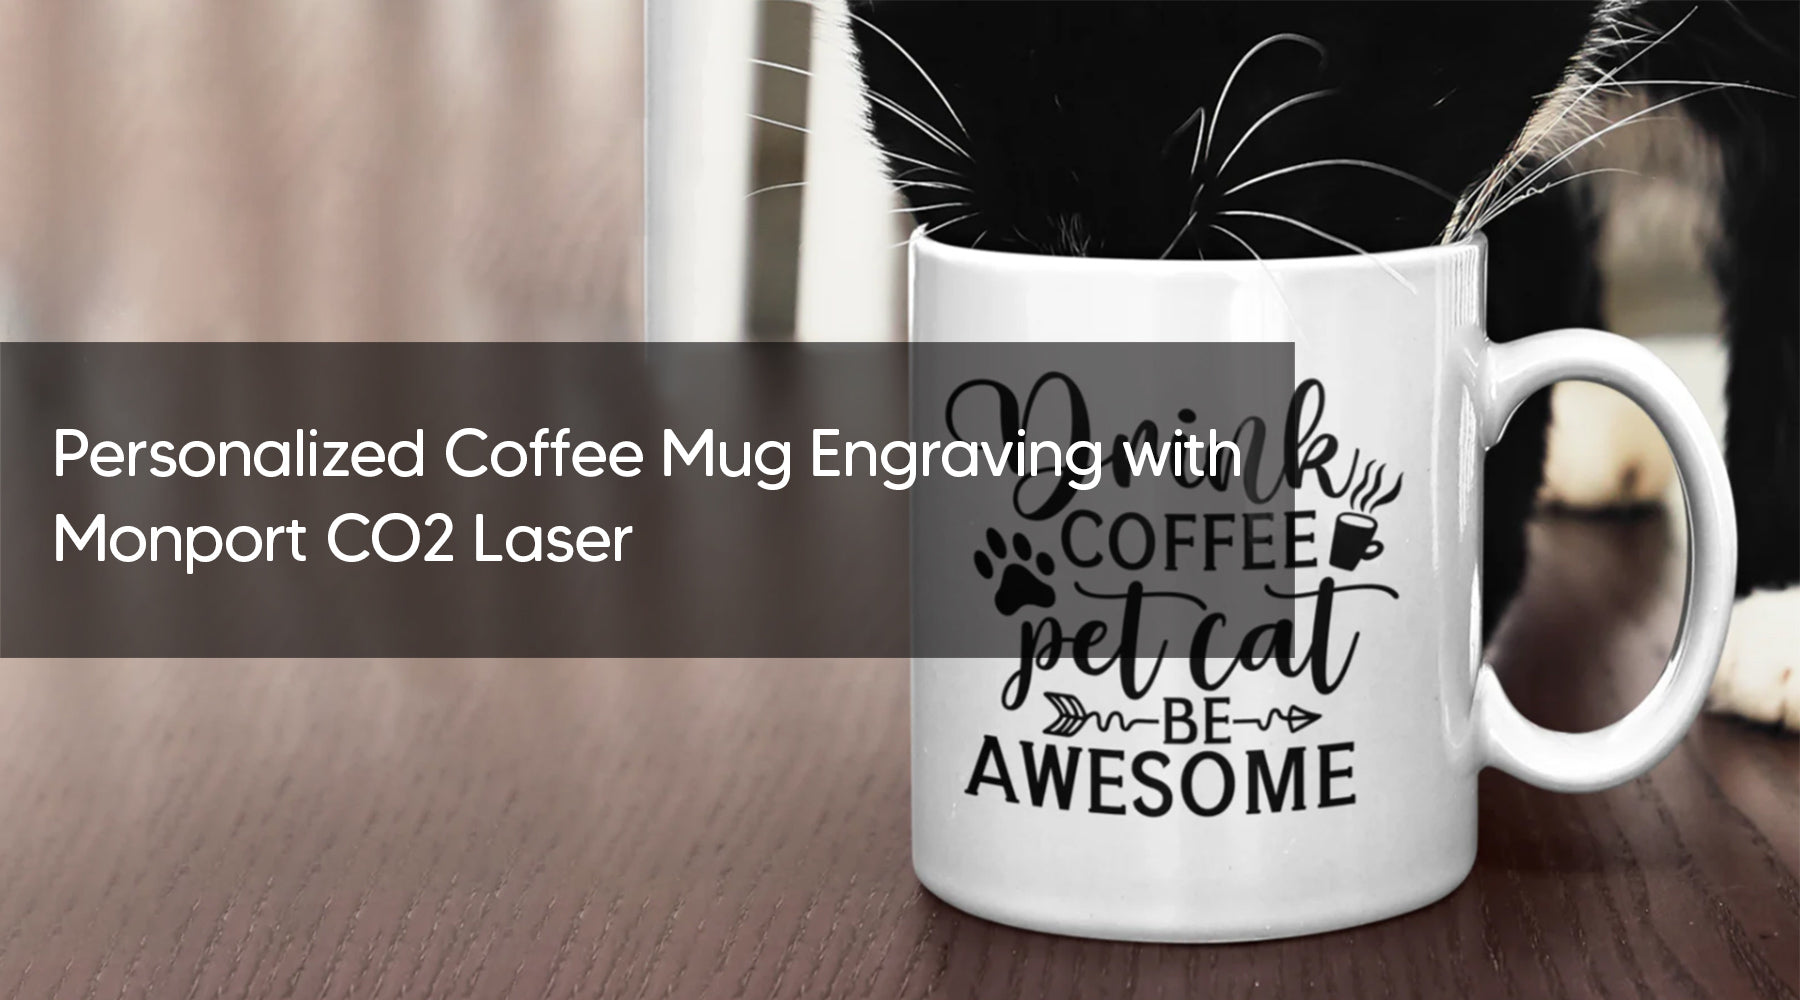 Personalized Coffee Mug Engraving with Monport CO2 Laser